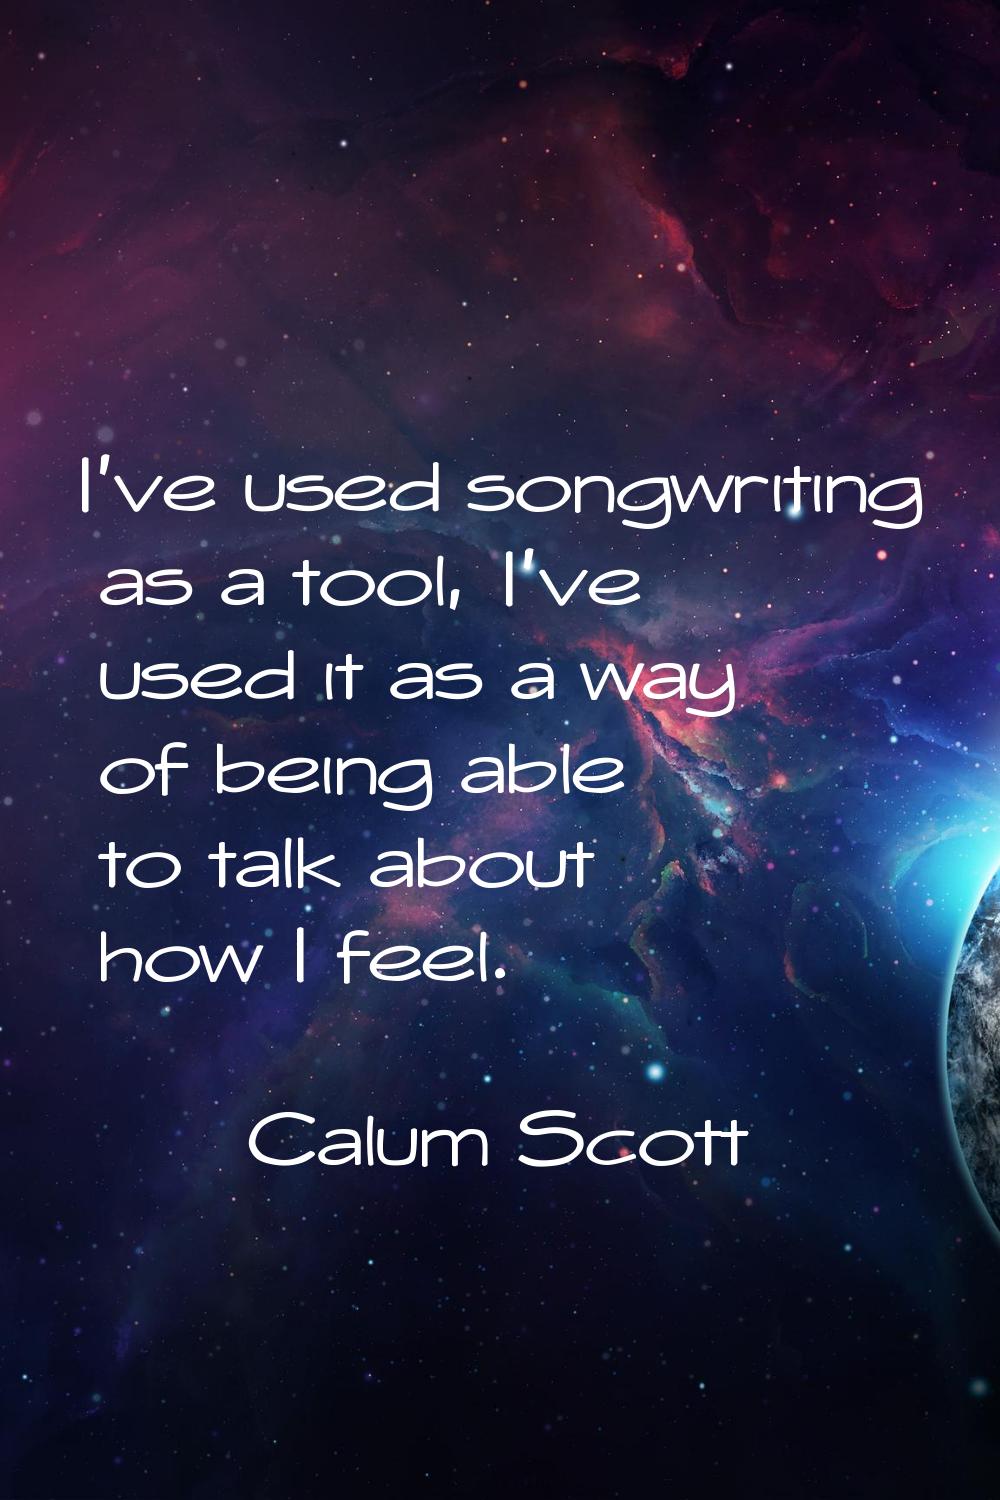 I've used songwriting as a tool, I've used it as a way of being able to talk about how I feel.